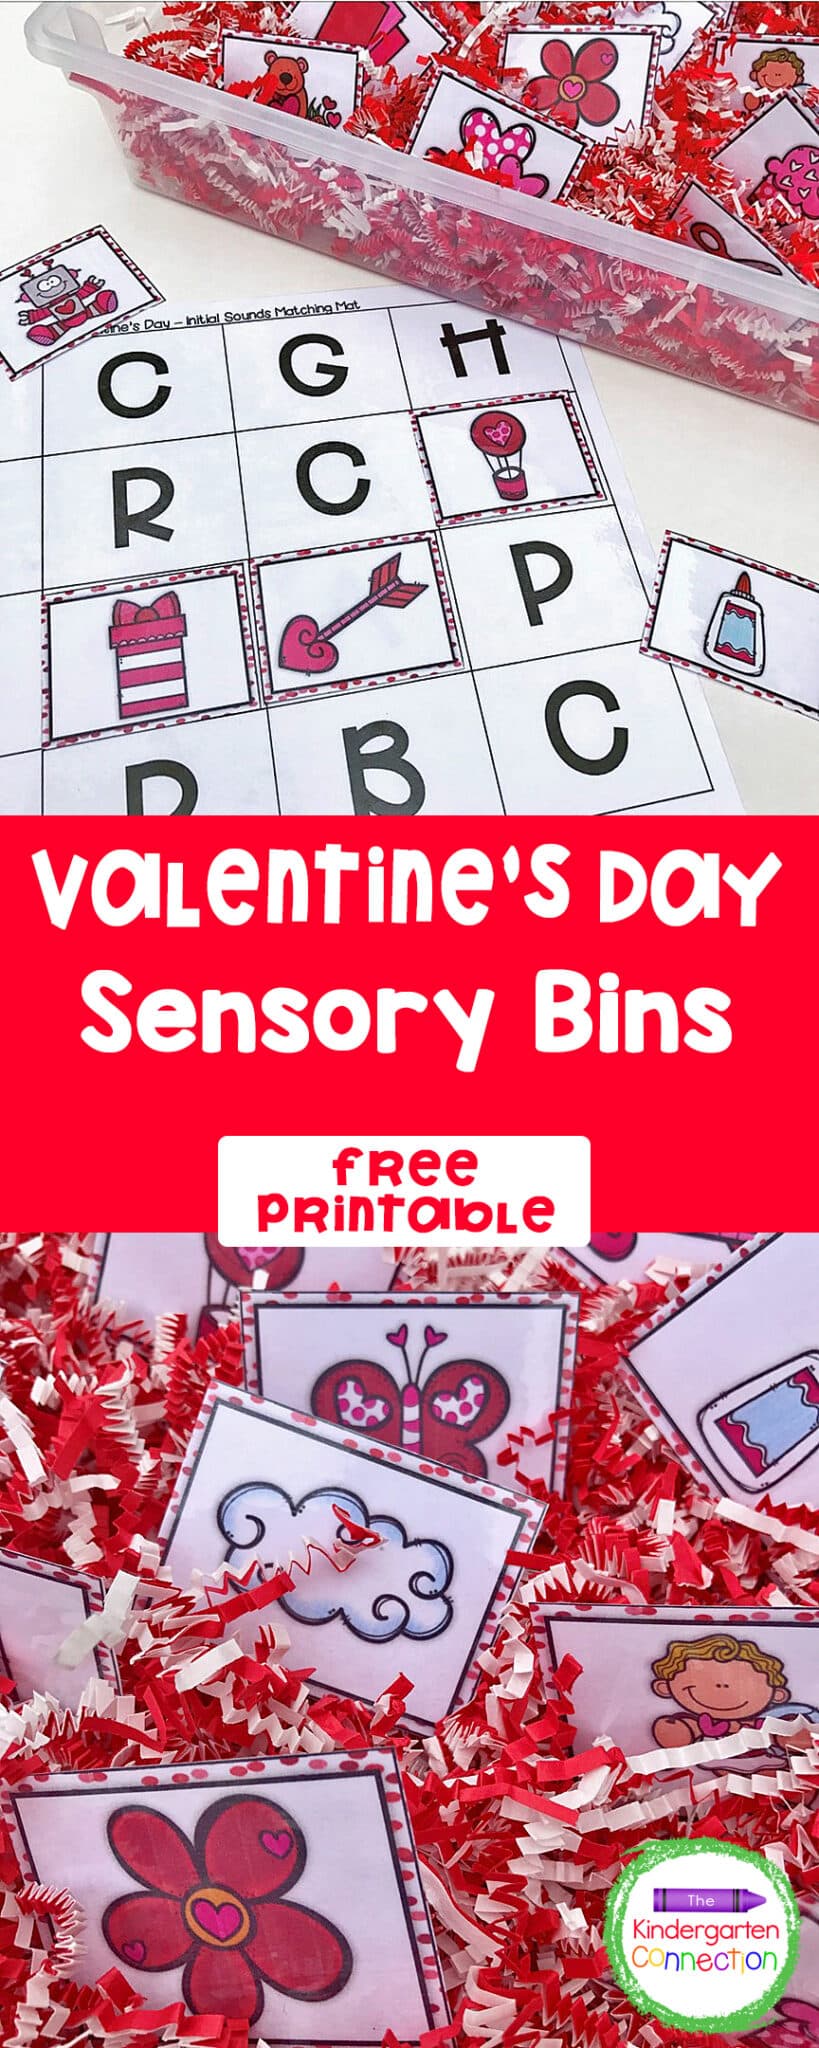 These Valentine's Day Sensory Bins are a great way to have hands-on, interactive fun with literacy skills this Valentine's season with Kindergarten and 1st Grade students!